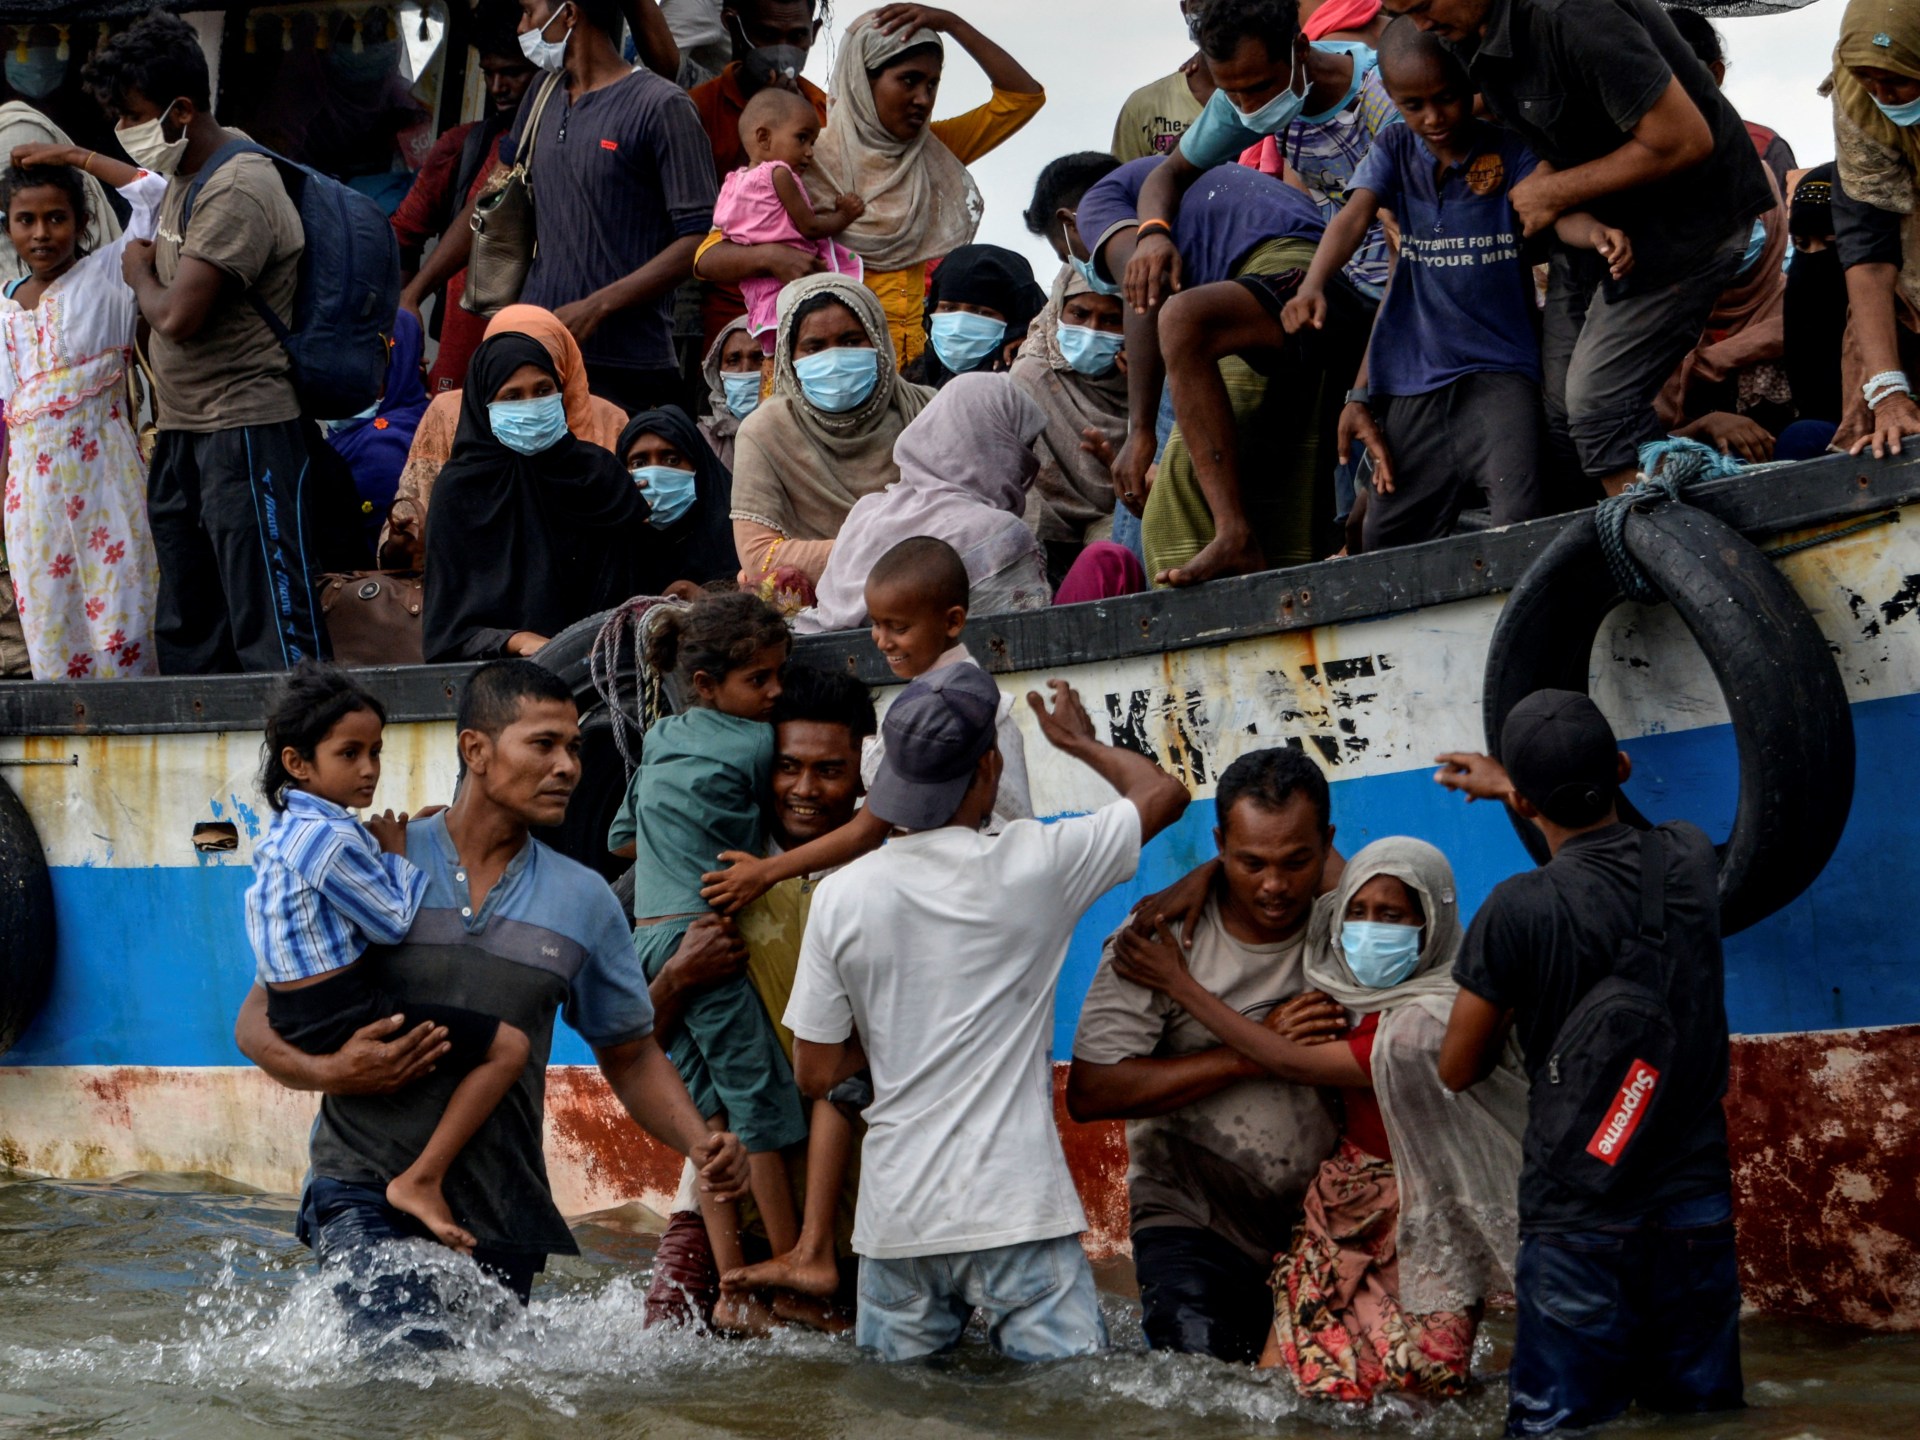 Rohingya are drowning at sea. Asia’s leaders are responsible